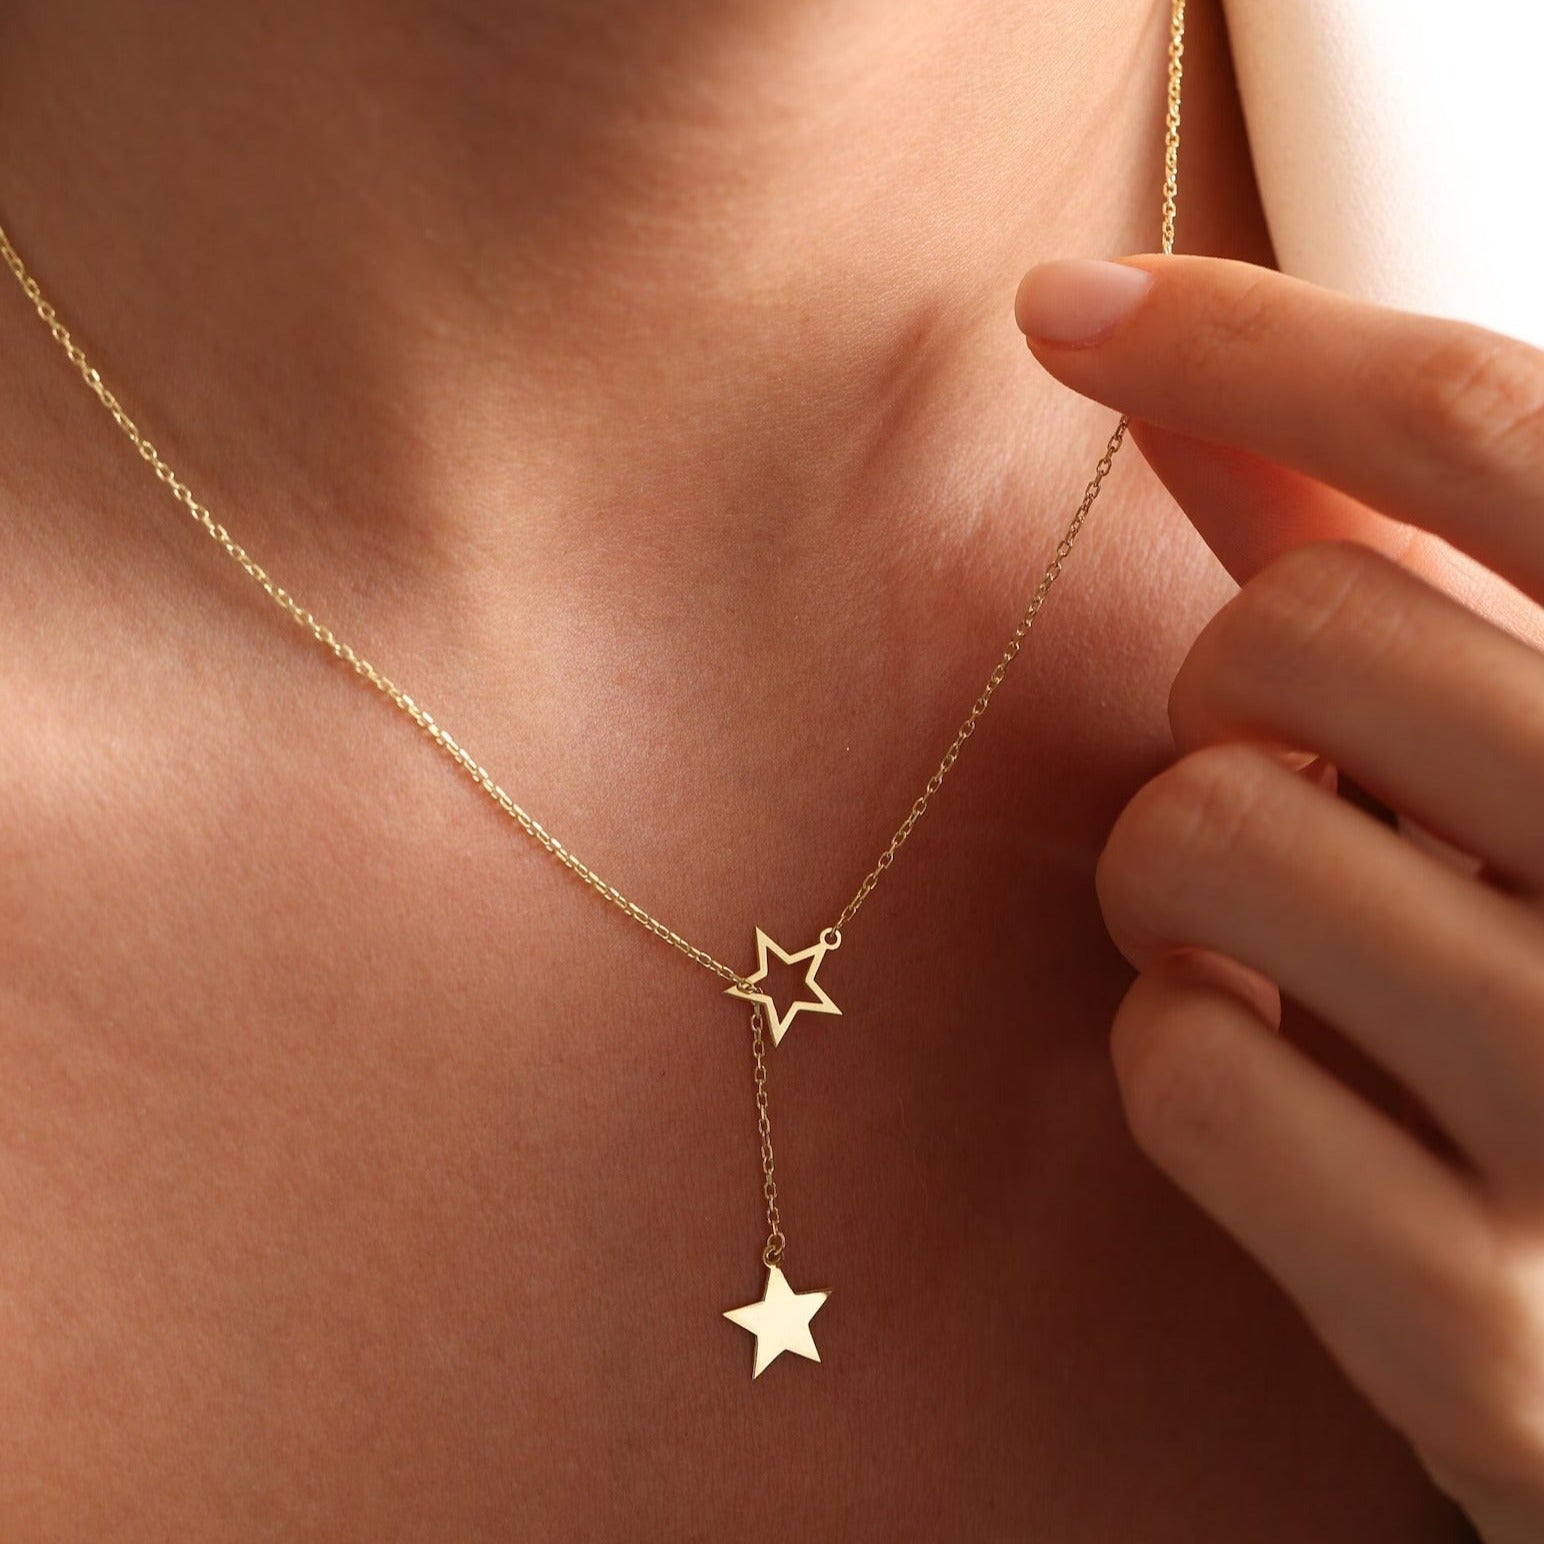 Captivate the night with our 18 Carat Gold Tiny Star Name Necklace - Burst of Arabia. A stellar symphony inspired by the enchanting tales of Arabic constellations